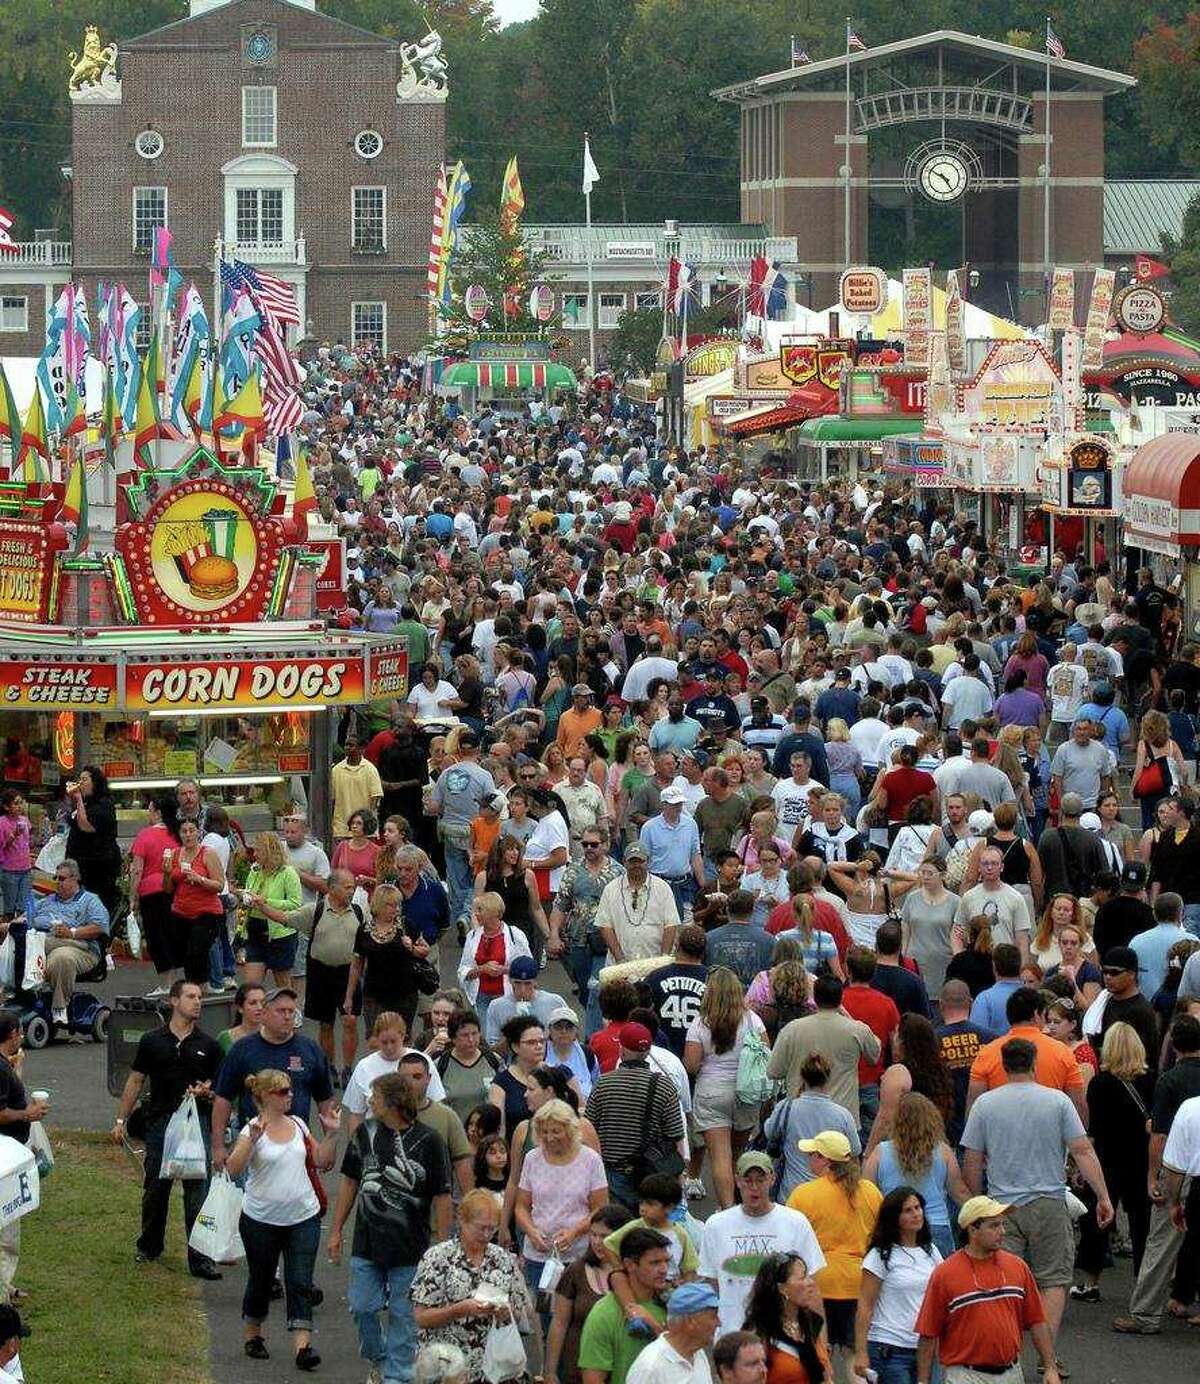 Big E a family fair tradition for many Connecticut residents